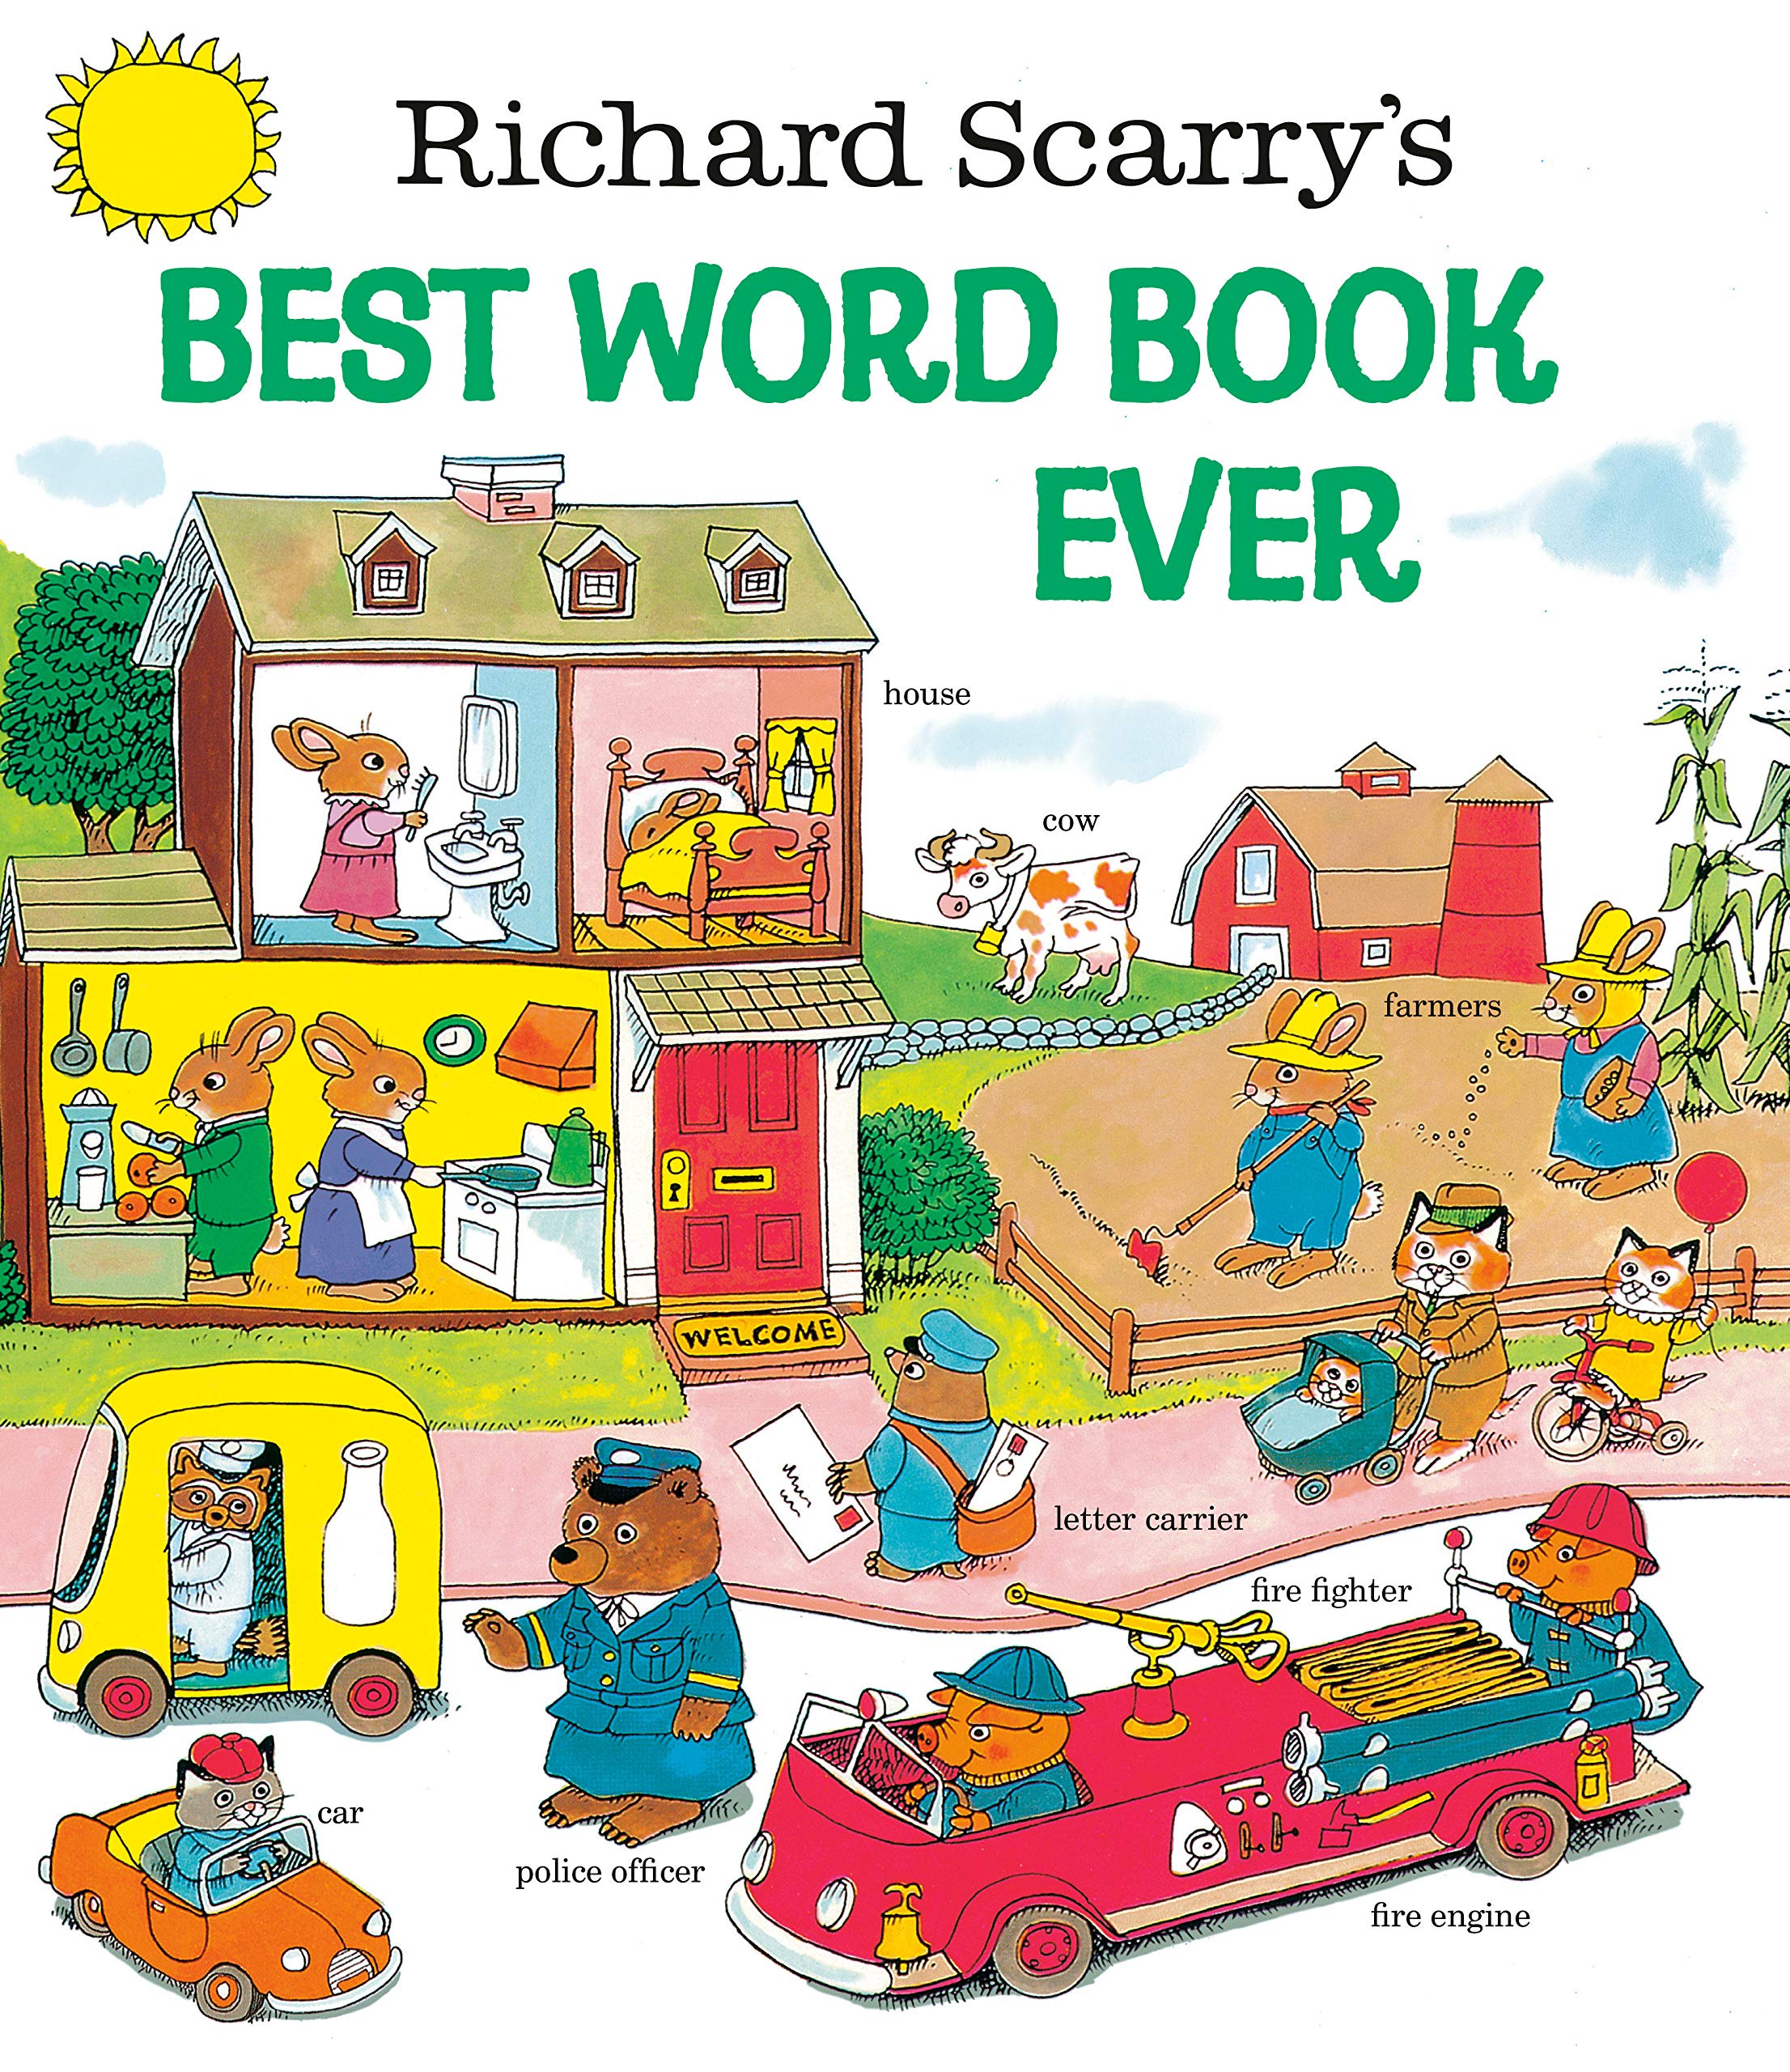 Fuse 8 n’ Kate: Our 250th Episode! Richard Scarry’s Best Word Book Ever